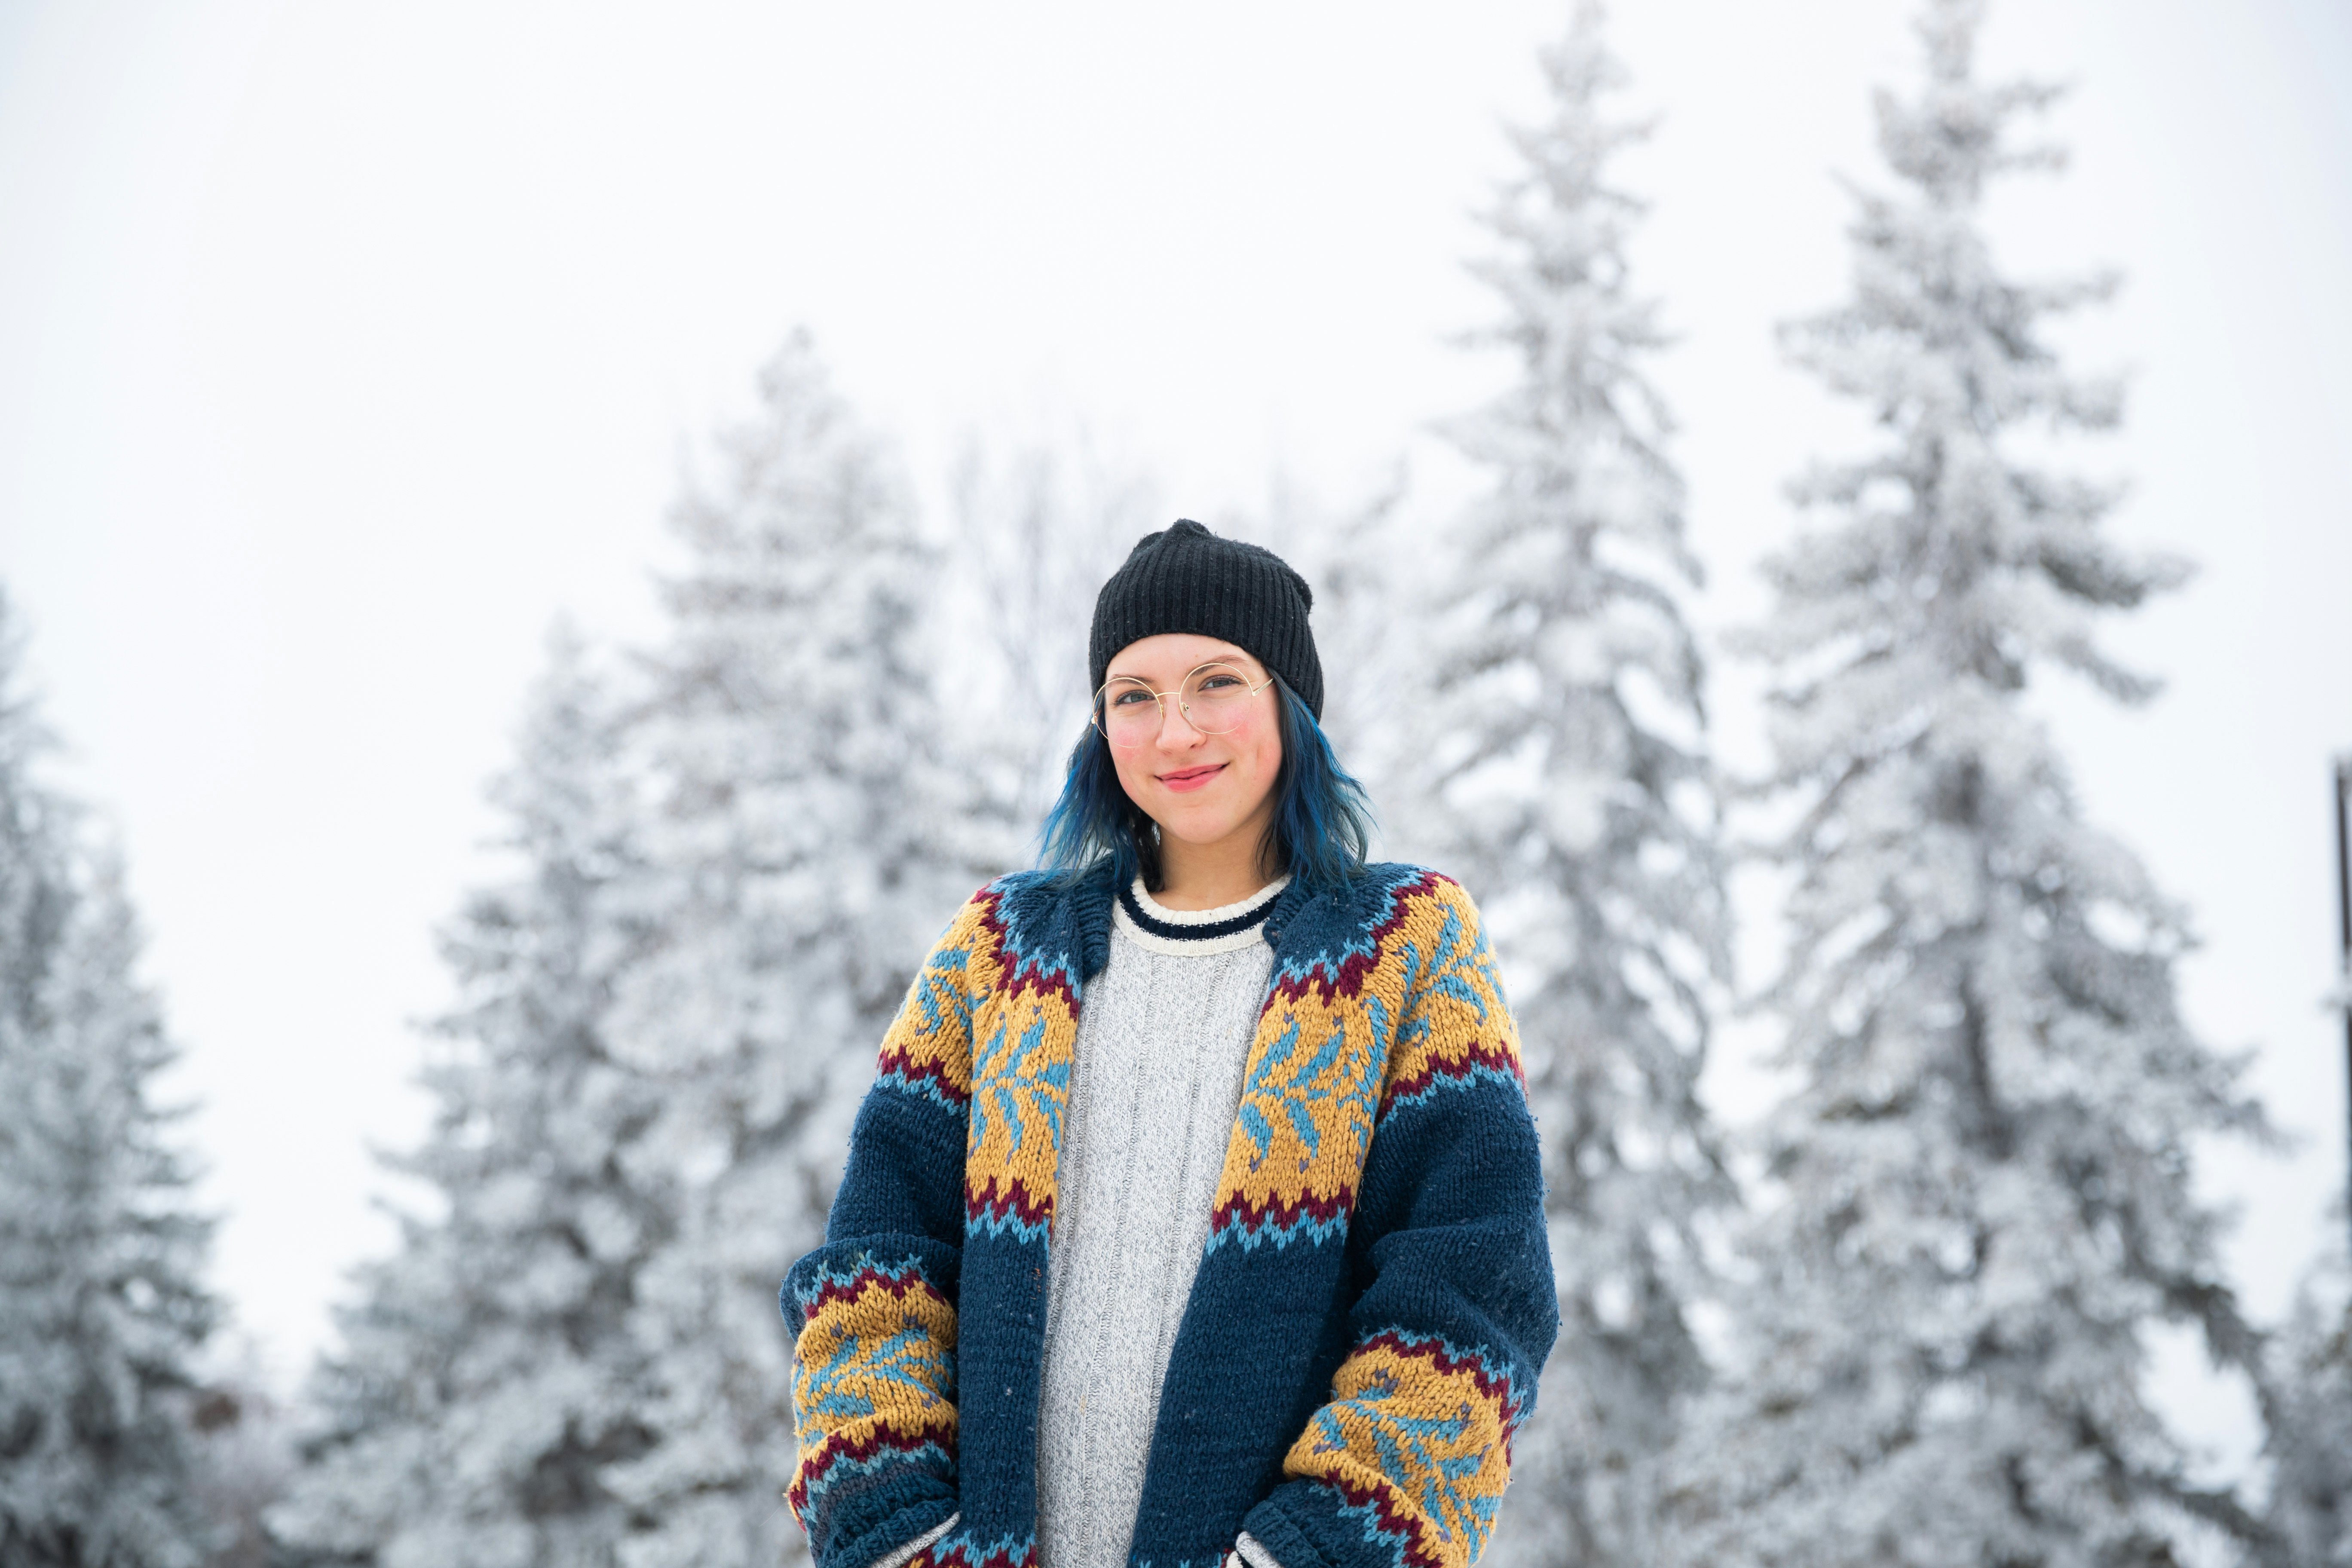 woman in blue and white sweater standing on snow covered ground during daytime